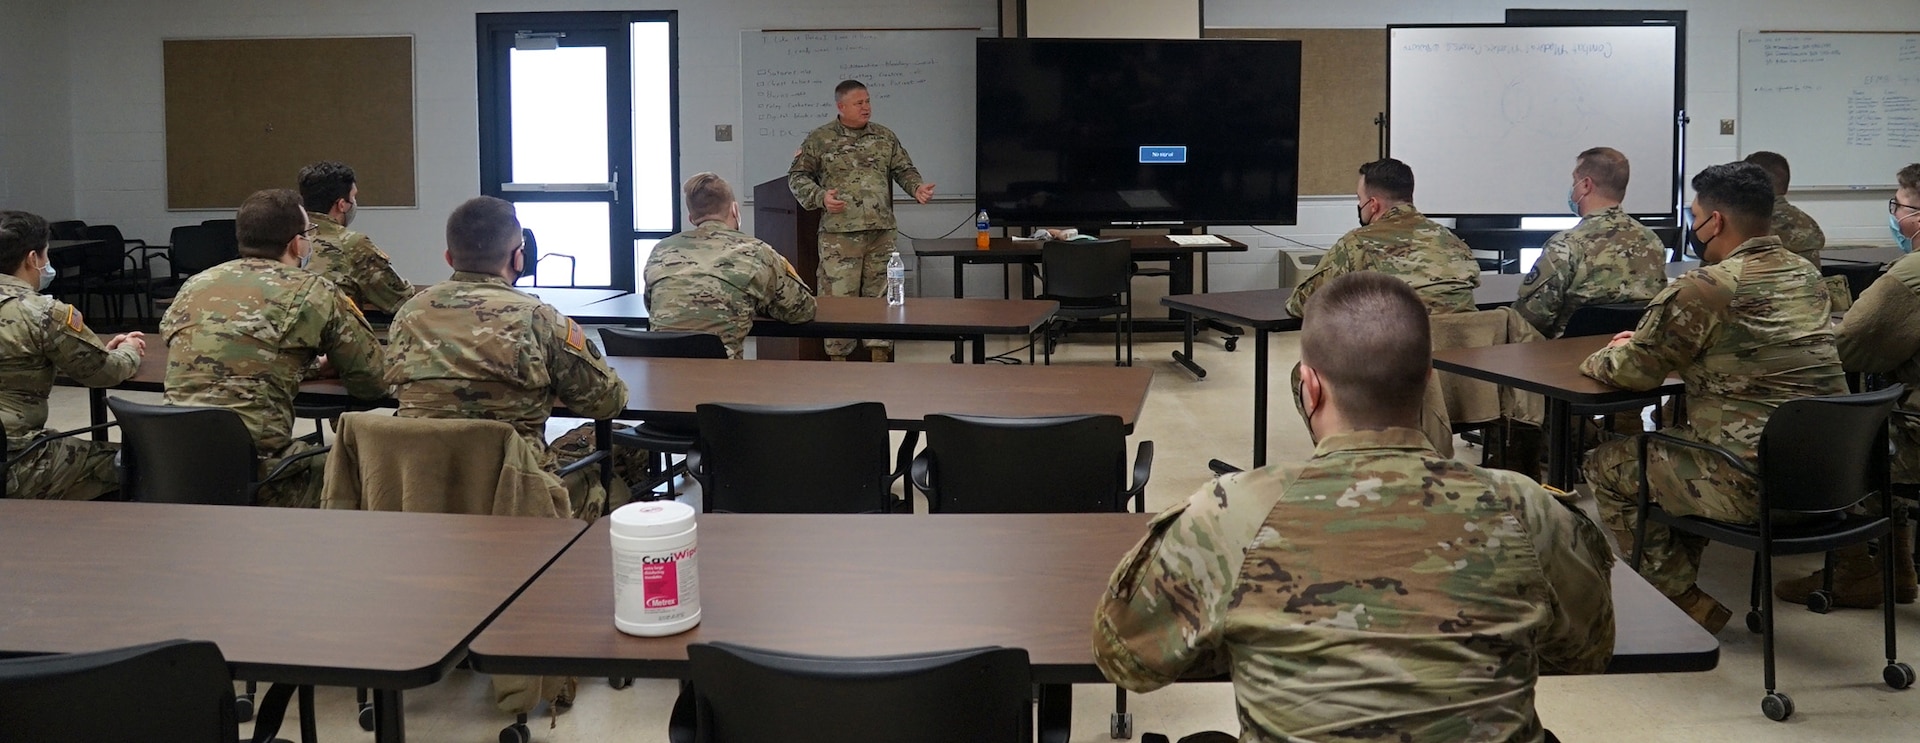 Around 20 people in Army OCP camouflage uniform sit at rectangular tables in a classroom.